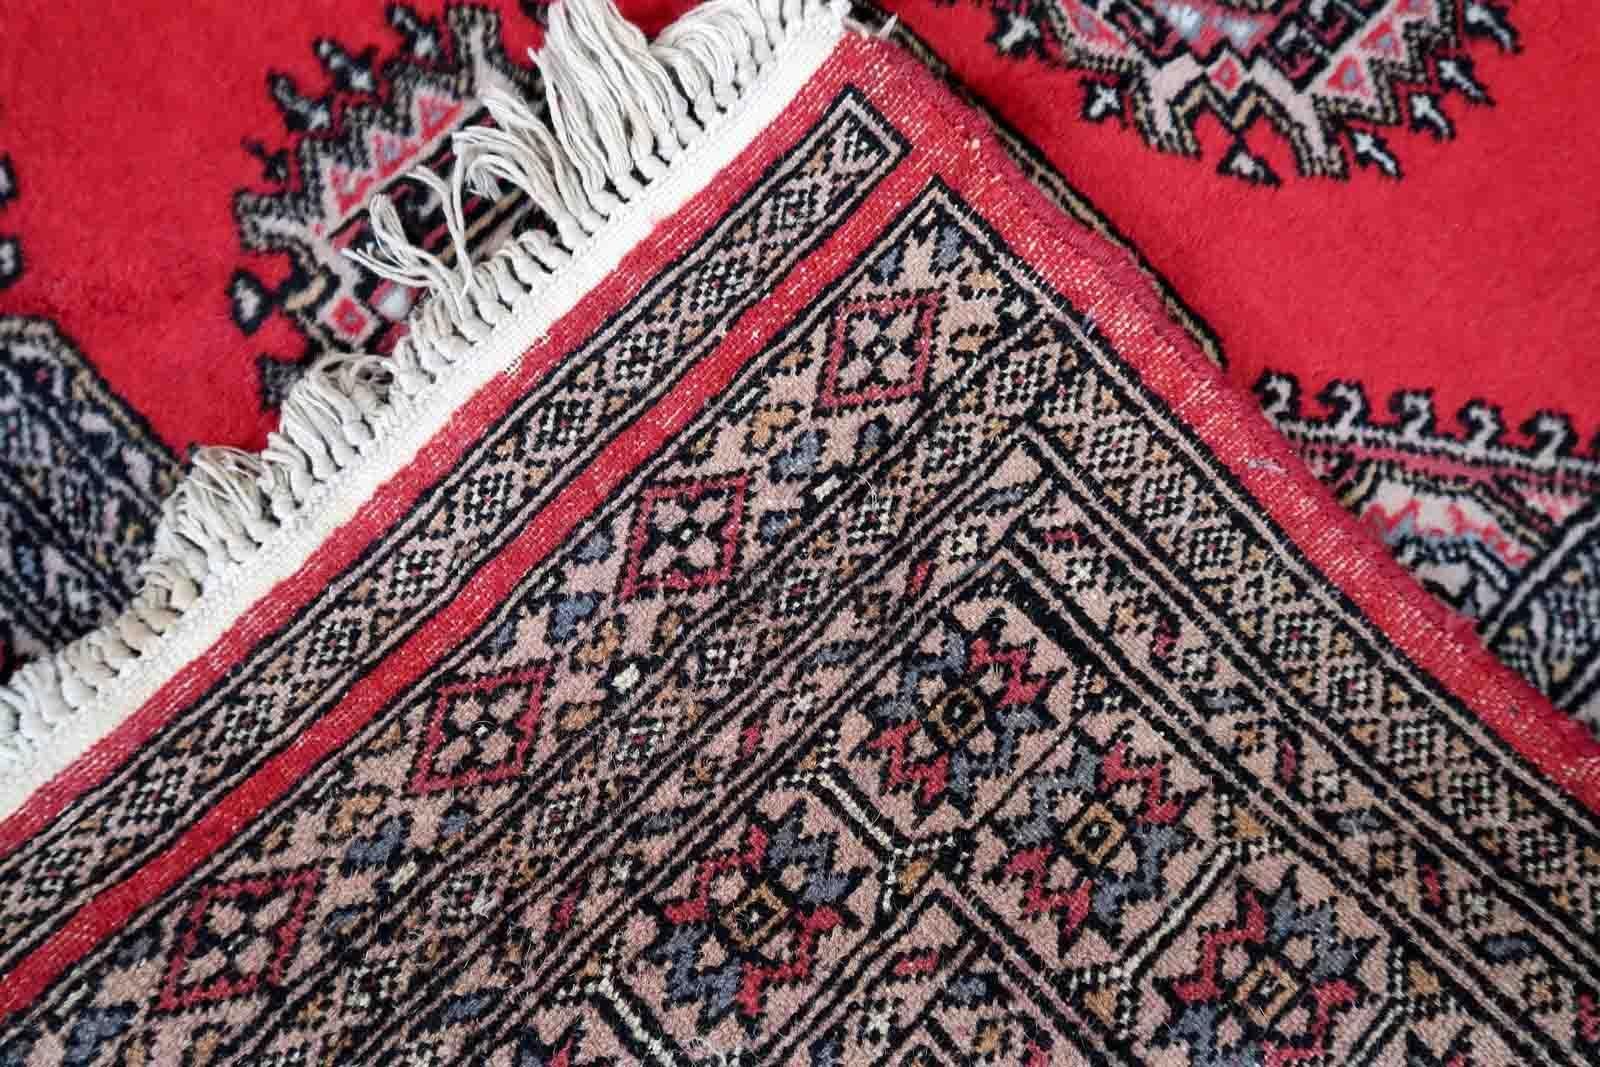 Handmade vintage Uzbek Bukhara rug in red color. The rug has been made in wool in the end of 20th century. It is in original condition, it has some signs of age.

-condition: original, some signs of age,

-circa: 1970s,

-size: 3' x 6.1' (92cm